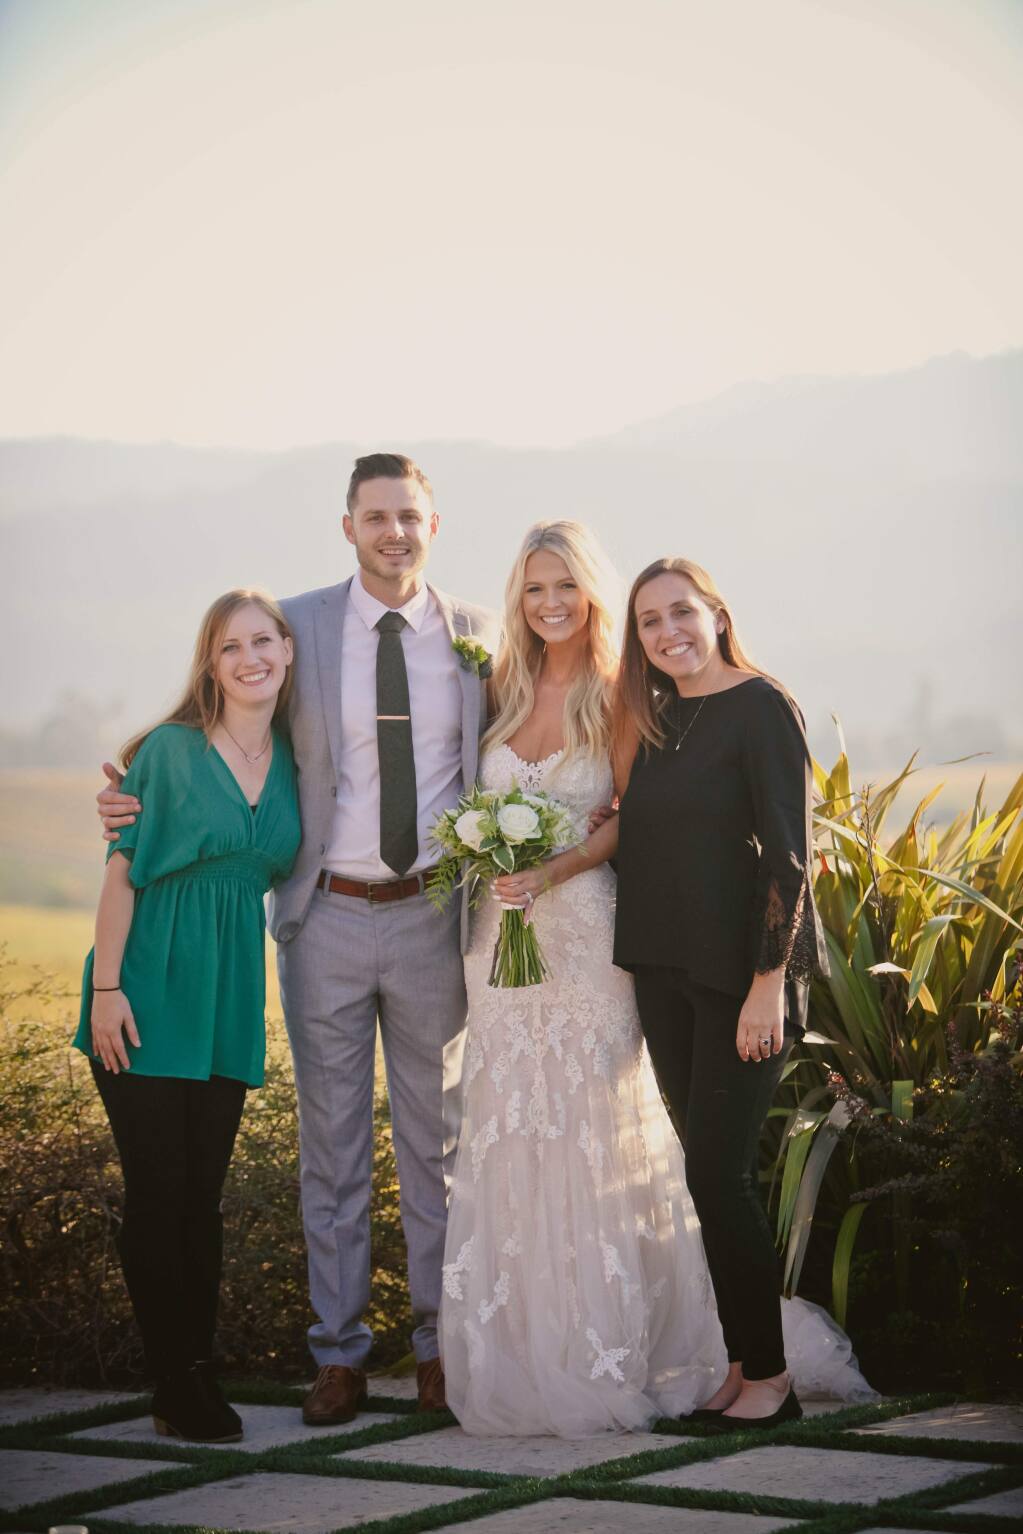 Wedding planners Kalika Ansel (far left) and Brittany Rogers-Hanson (far right) with groom Will White and bride Harrison Sap who, with Hanson's support, overcame obstacles to have their Wine Country wedding Wednesday. (photo courtesy of Runawaywithme weddings)